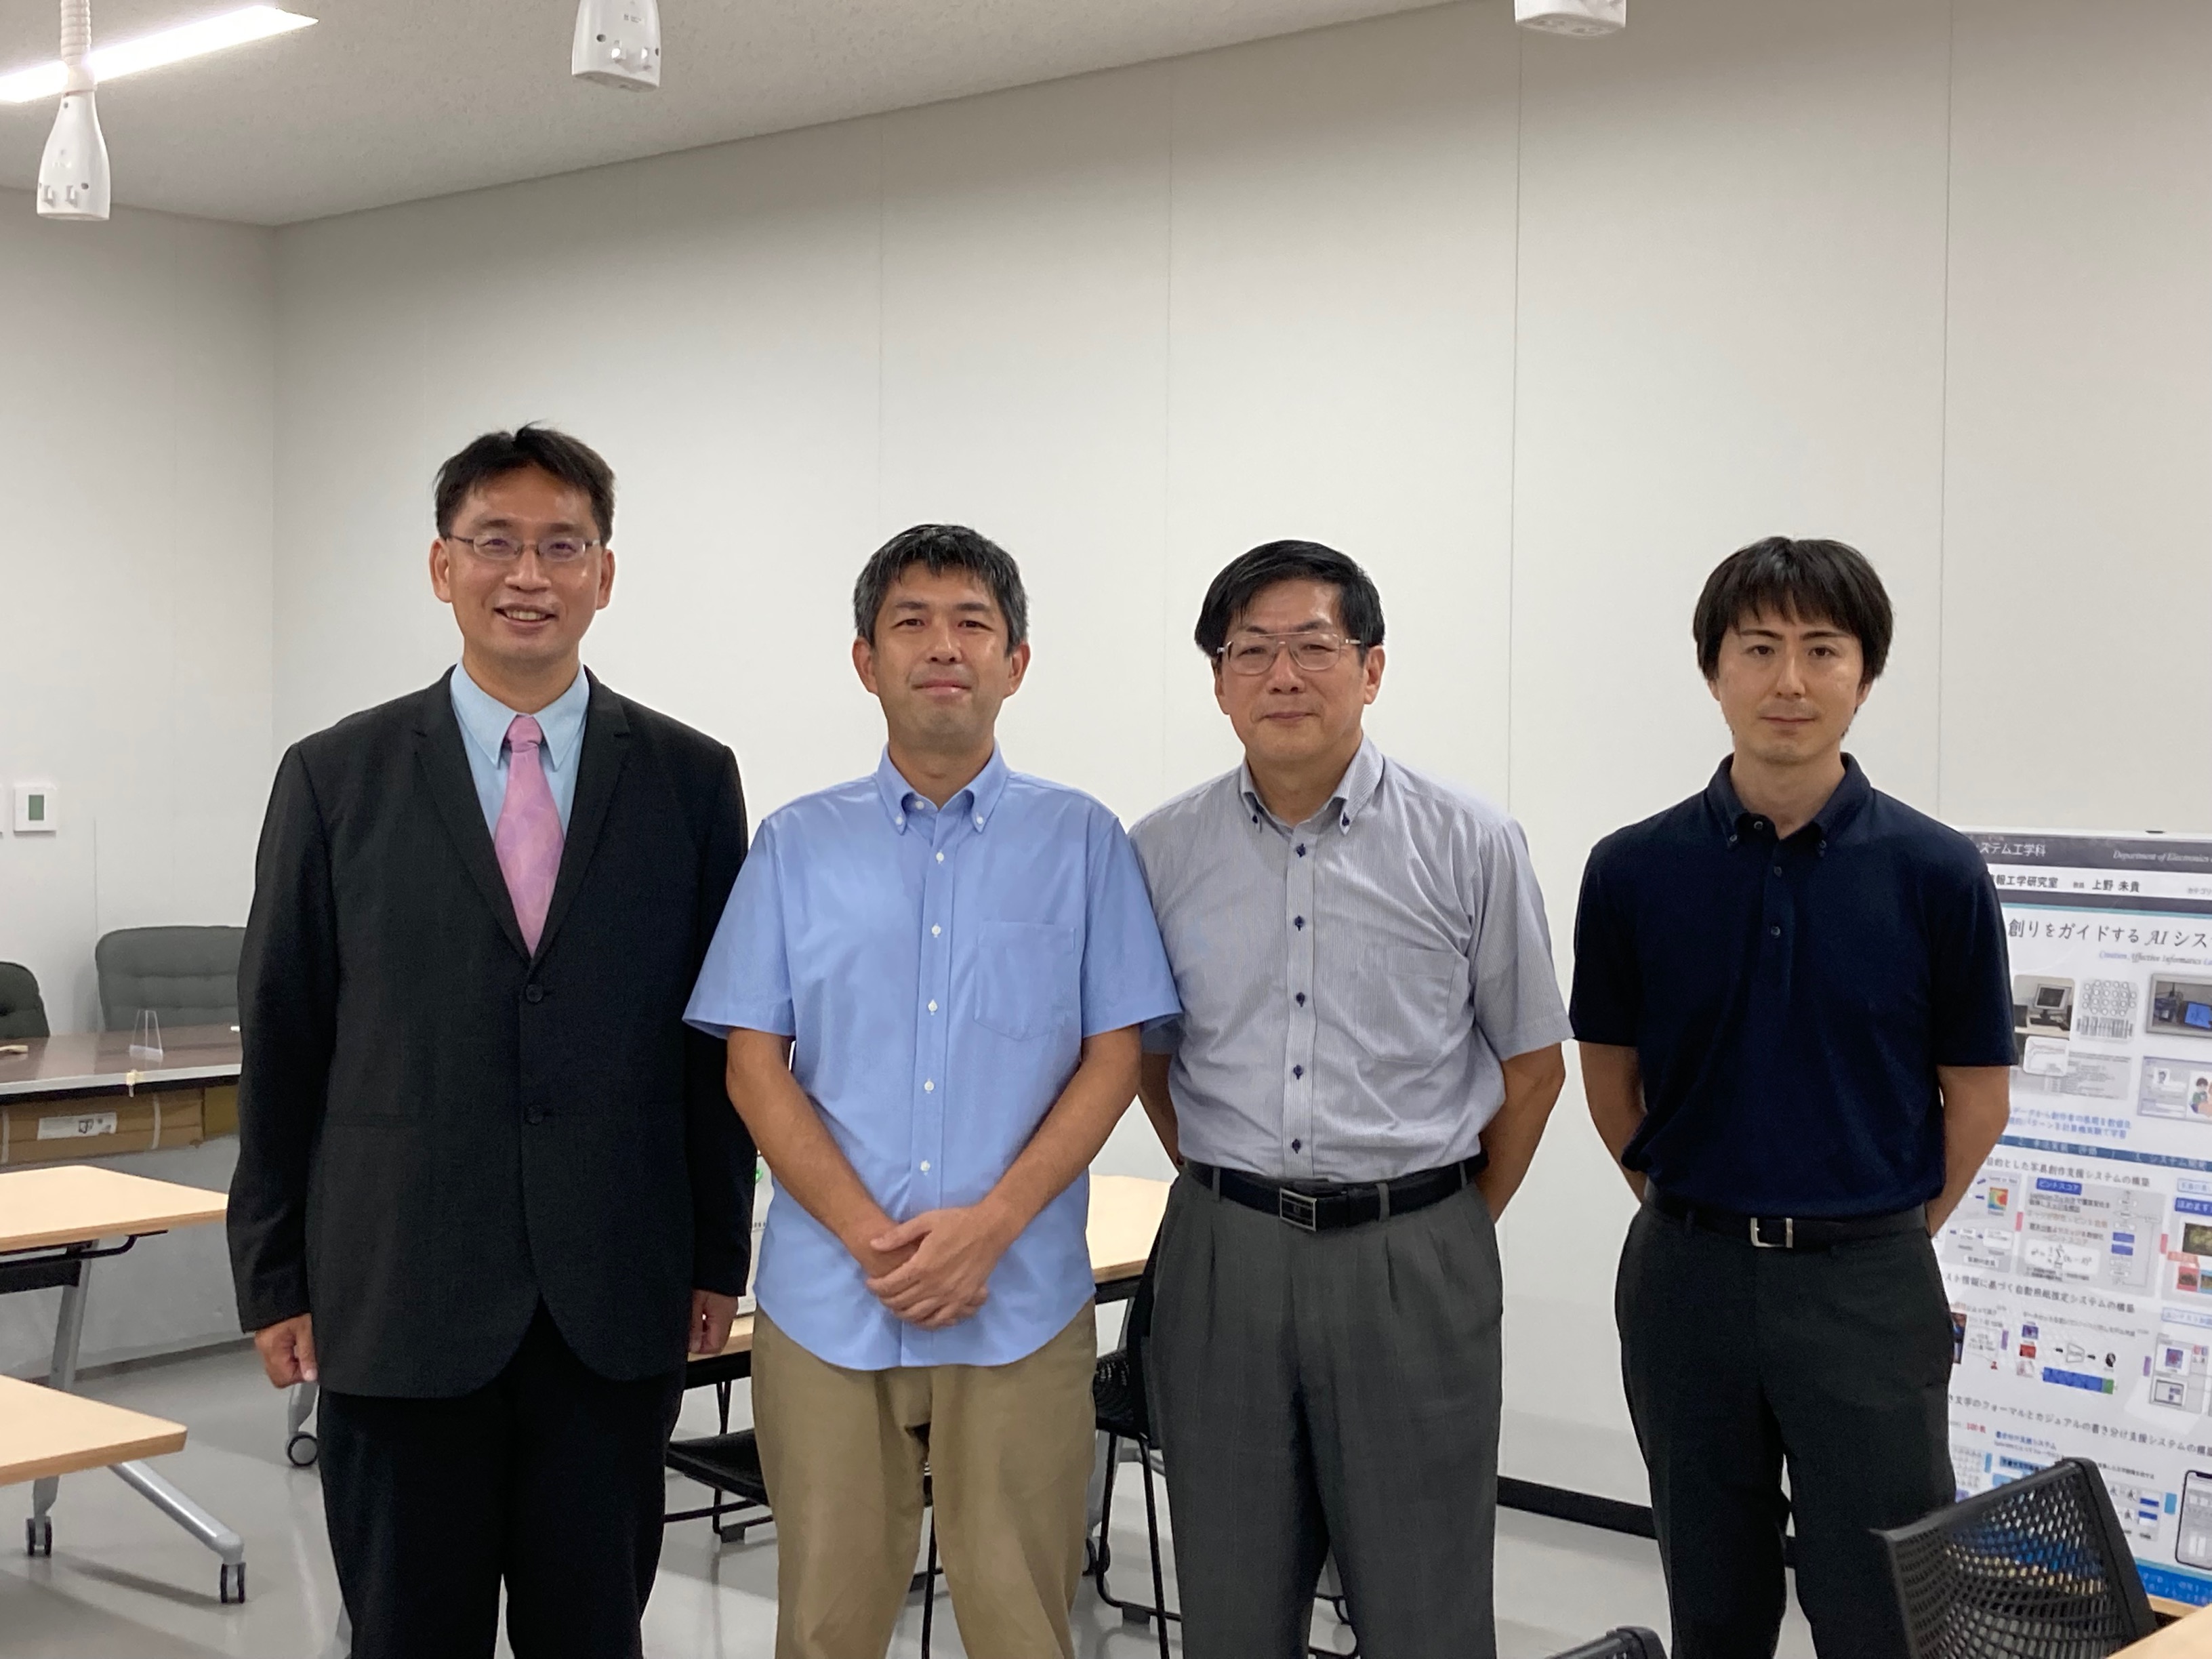 Faculties in charge of online iPBL held in August 2022 reunited at the Omiya Campus.